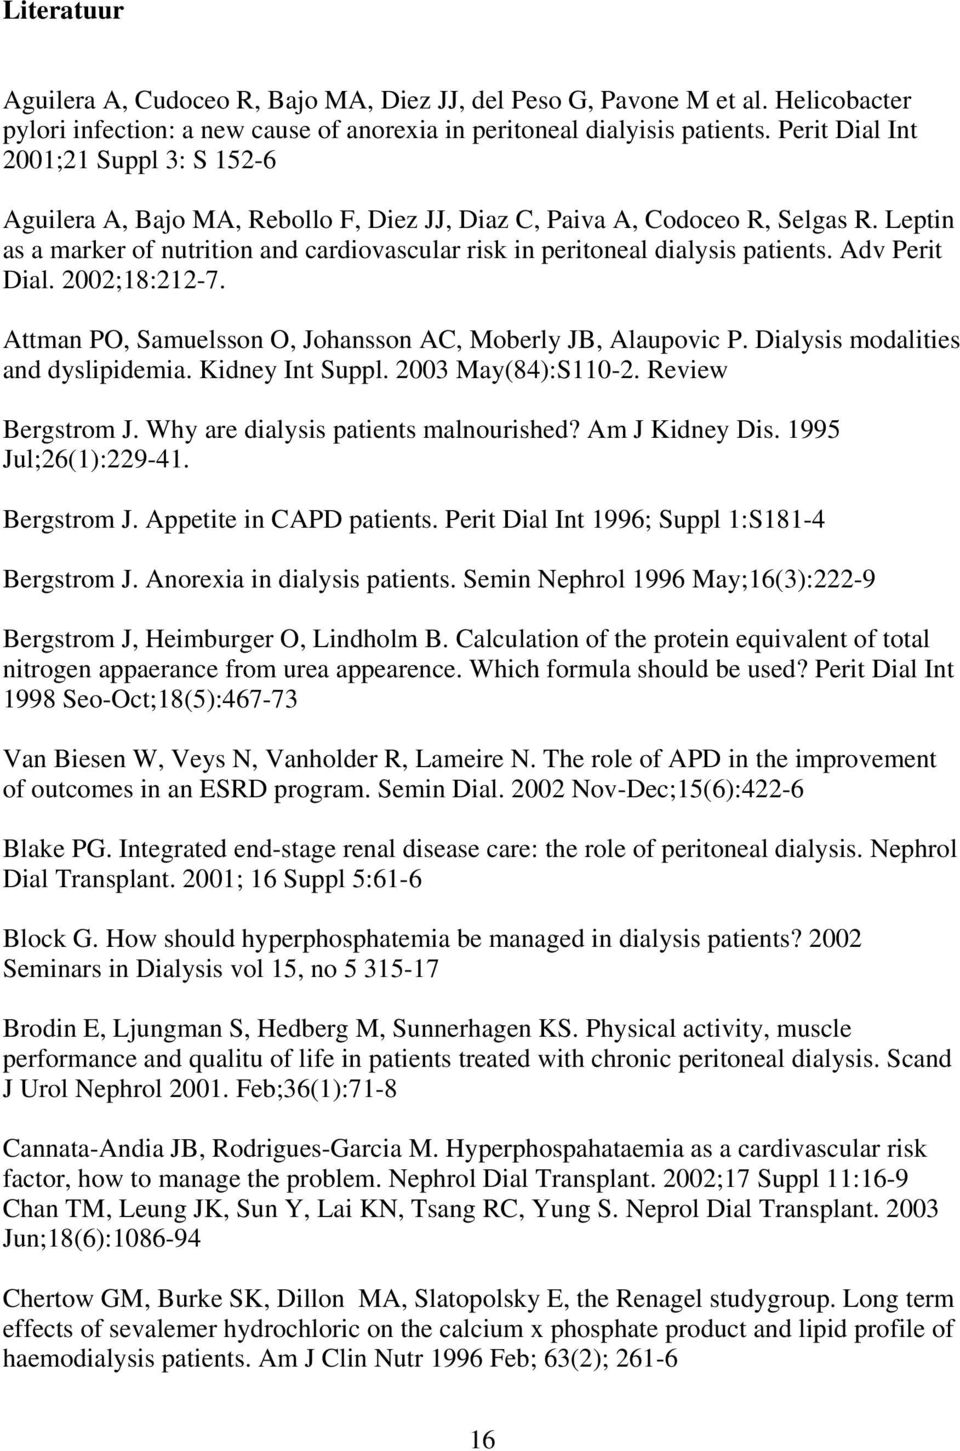 Leptin as a marker of nutrition and cardiovascular risk in peritoneal dialysis patients. Adv Perit Dial. 2002;18:212-7. Attman PO, Samuelsson O, Johansson AC, Moberly JB, Alaupovic P.